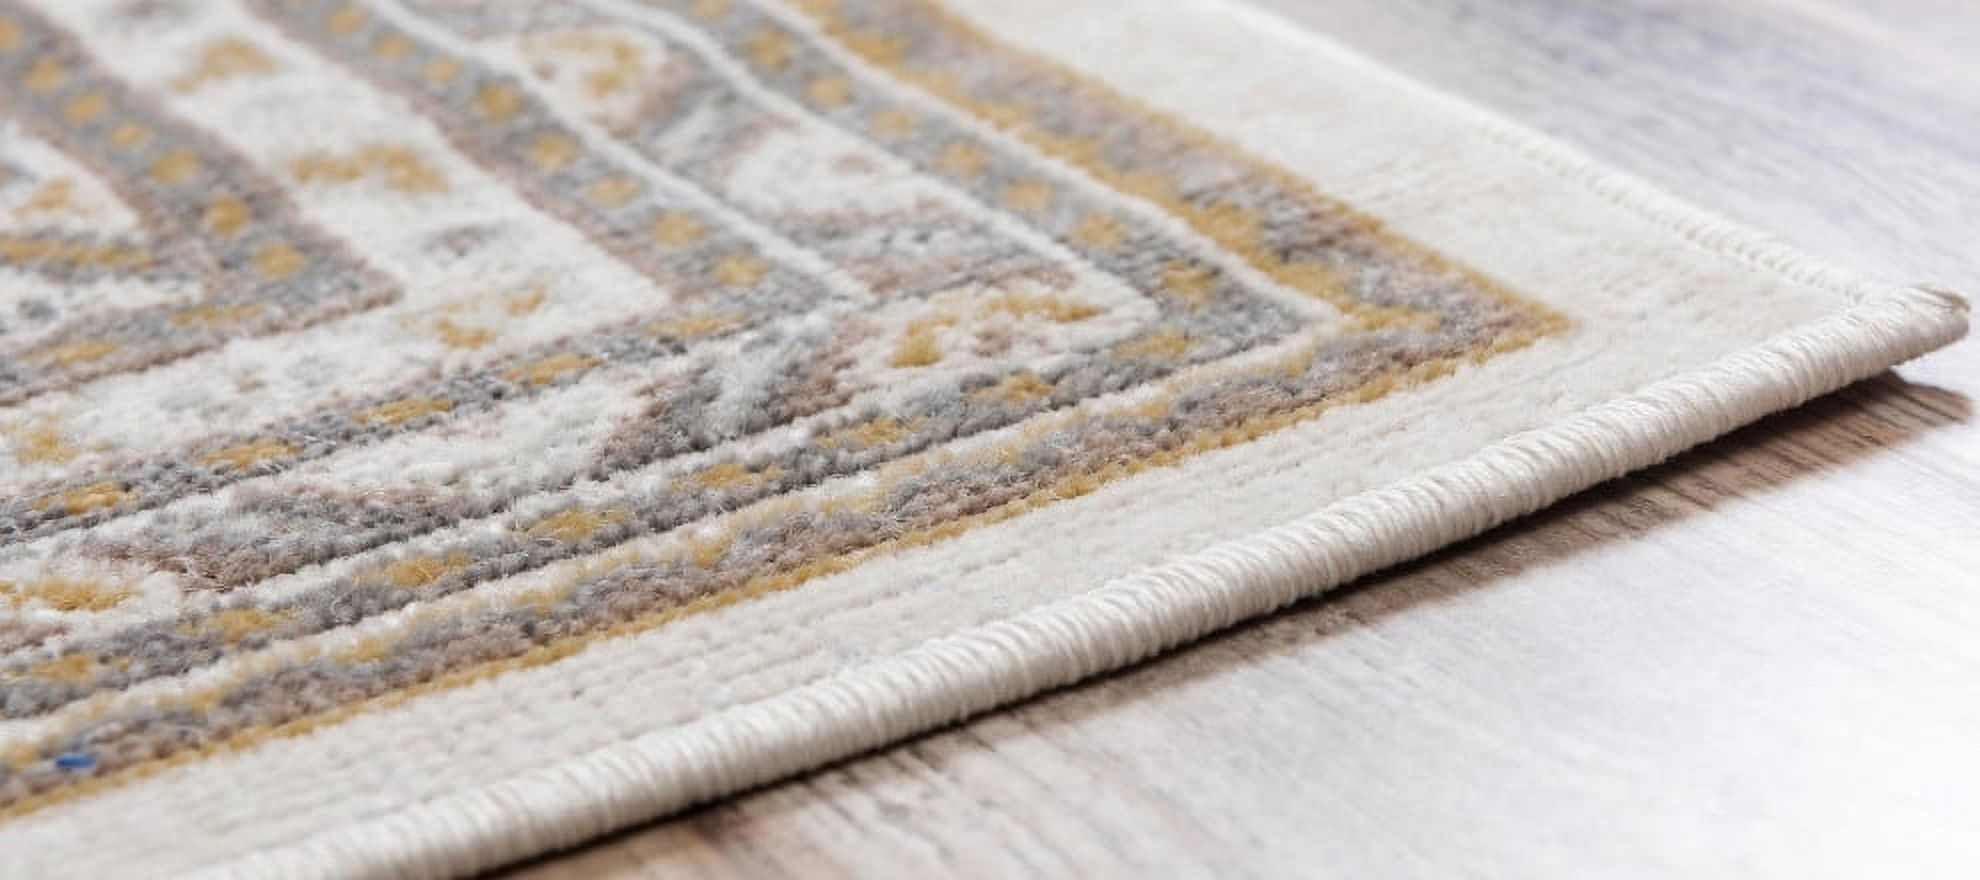 Unique Loom Indoor Rectangular Geometric Traditional Area Rugs Beige/Yellow/Off-White, 10' 0 x 13' 0 - image 4 of 4